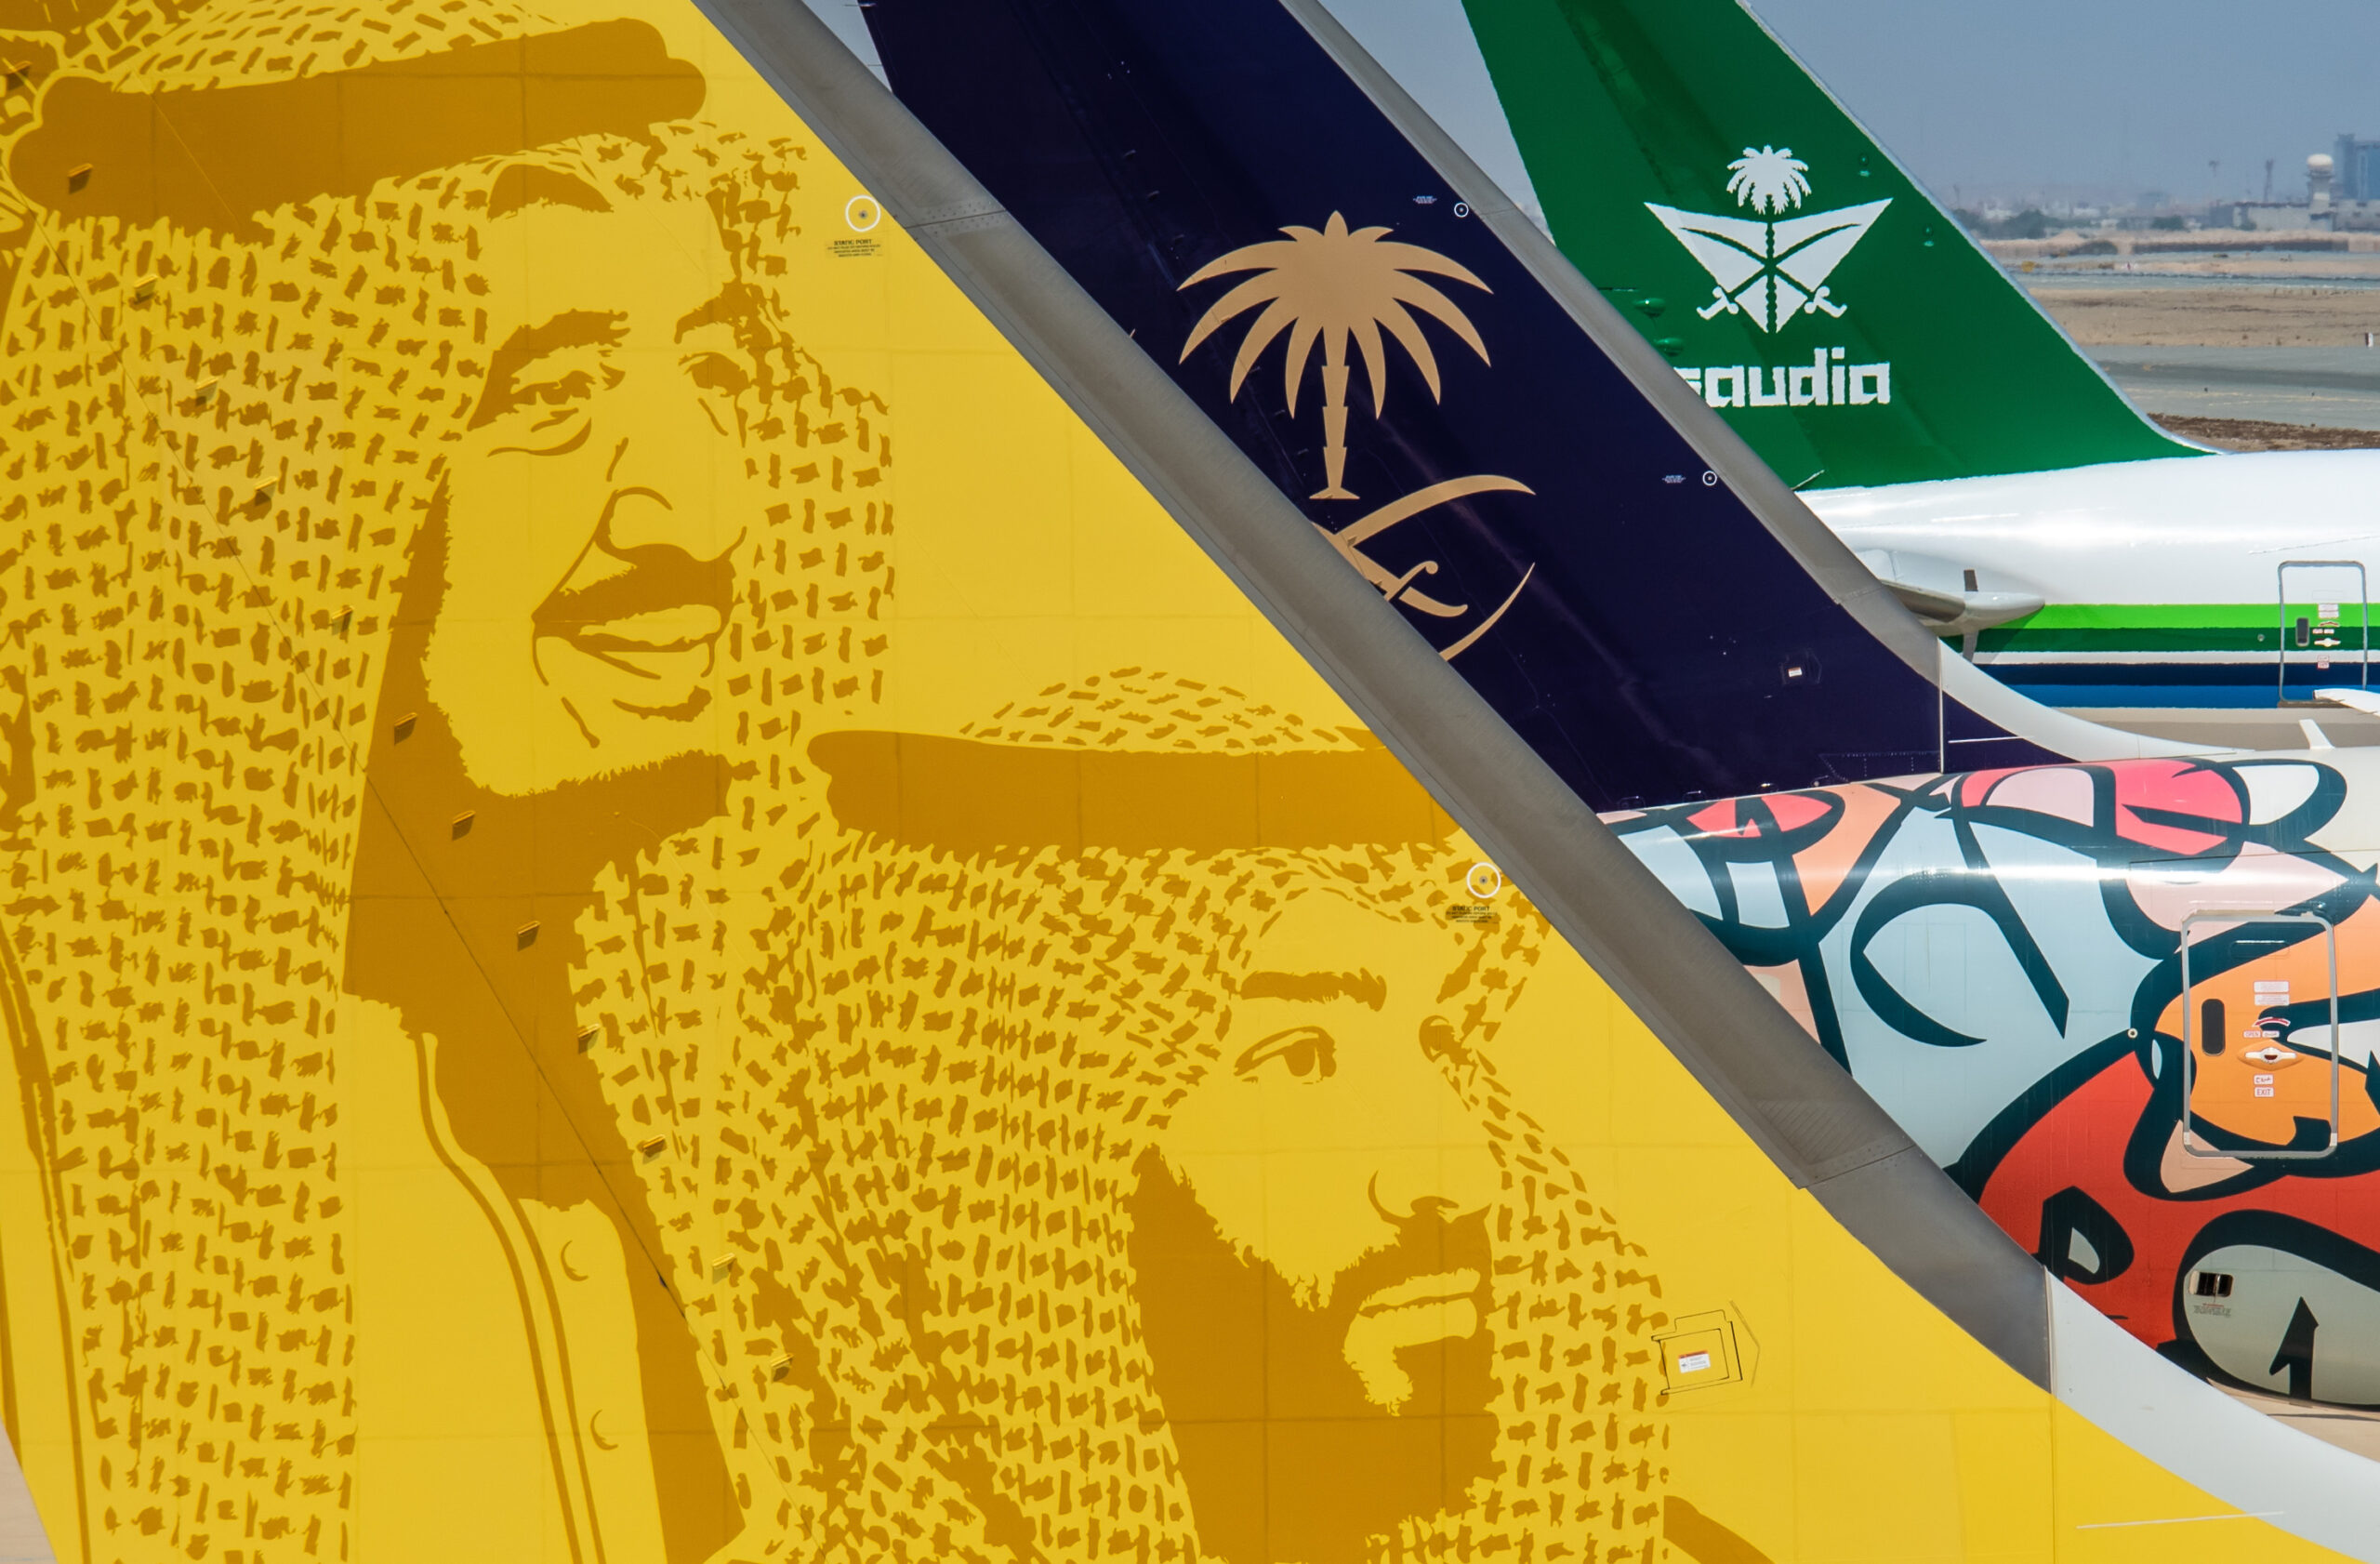 Saudia Reveals Two Special 75 Year Anniversary Liveries